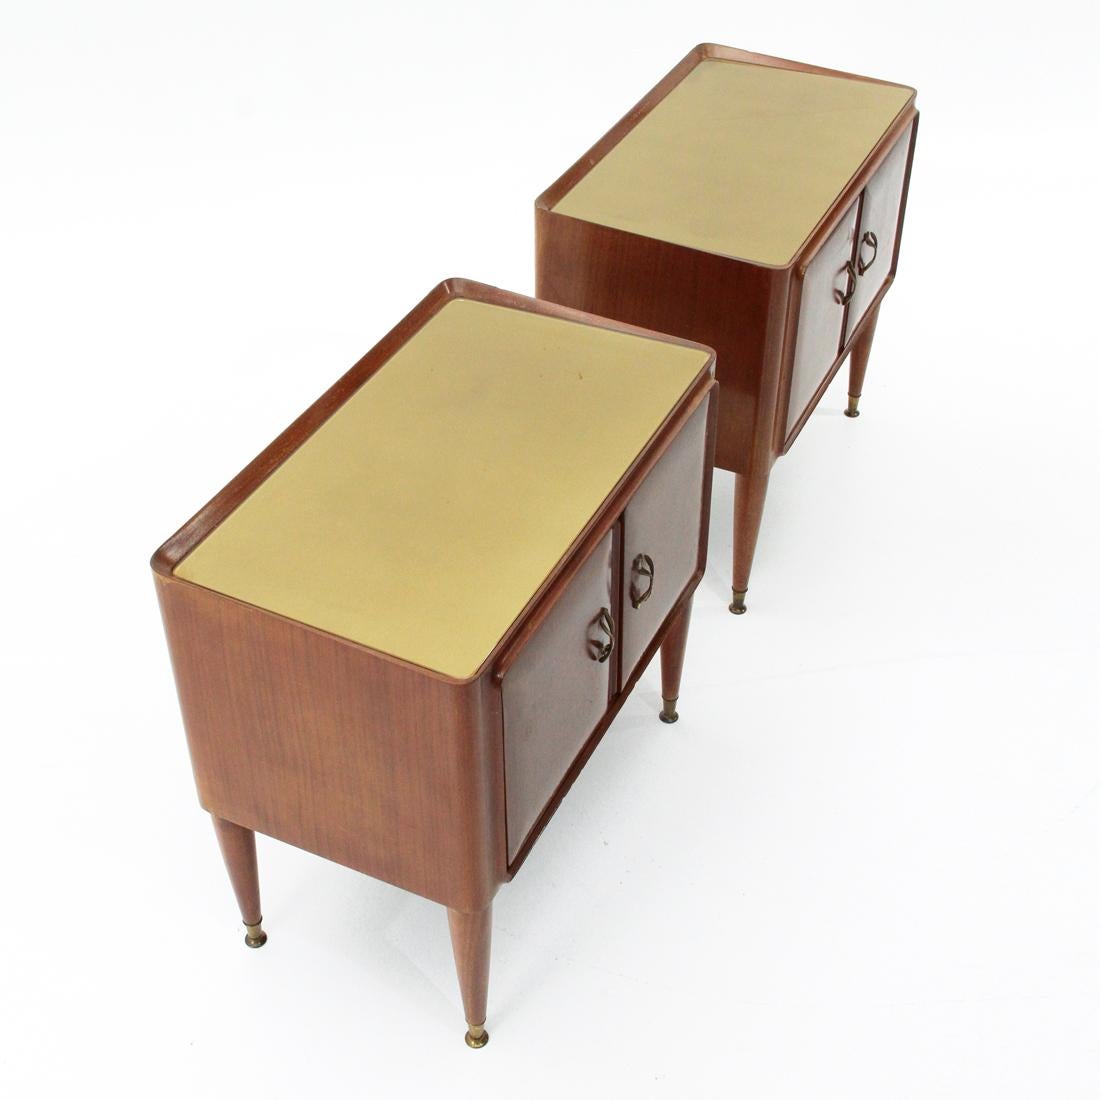 Pair of Italian-made bedside tables produced in the 1950s.
Veneered wooden structure with rounded corners.
Back painted glass top.
Veneered wooden doors with convex front surface and brass handles.
Turned legs in solid wood with brass